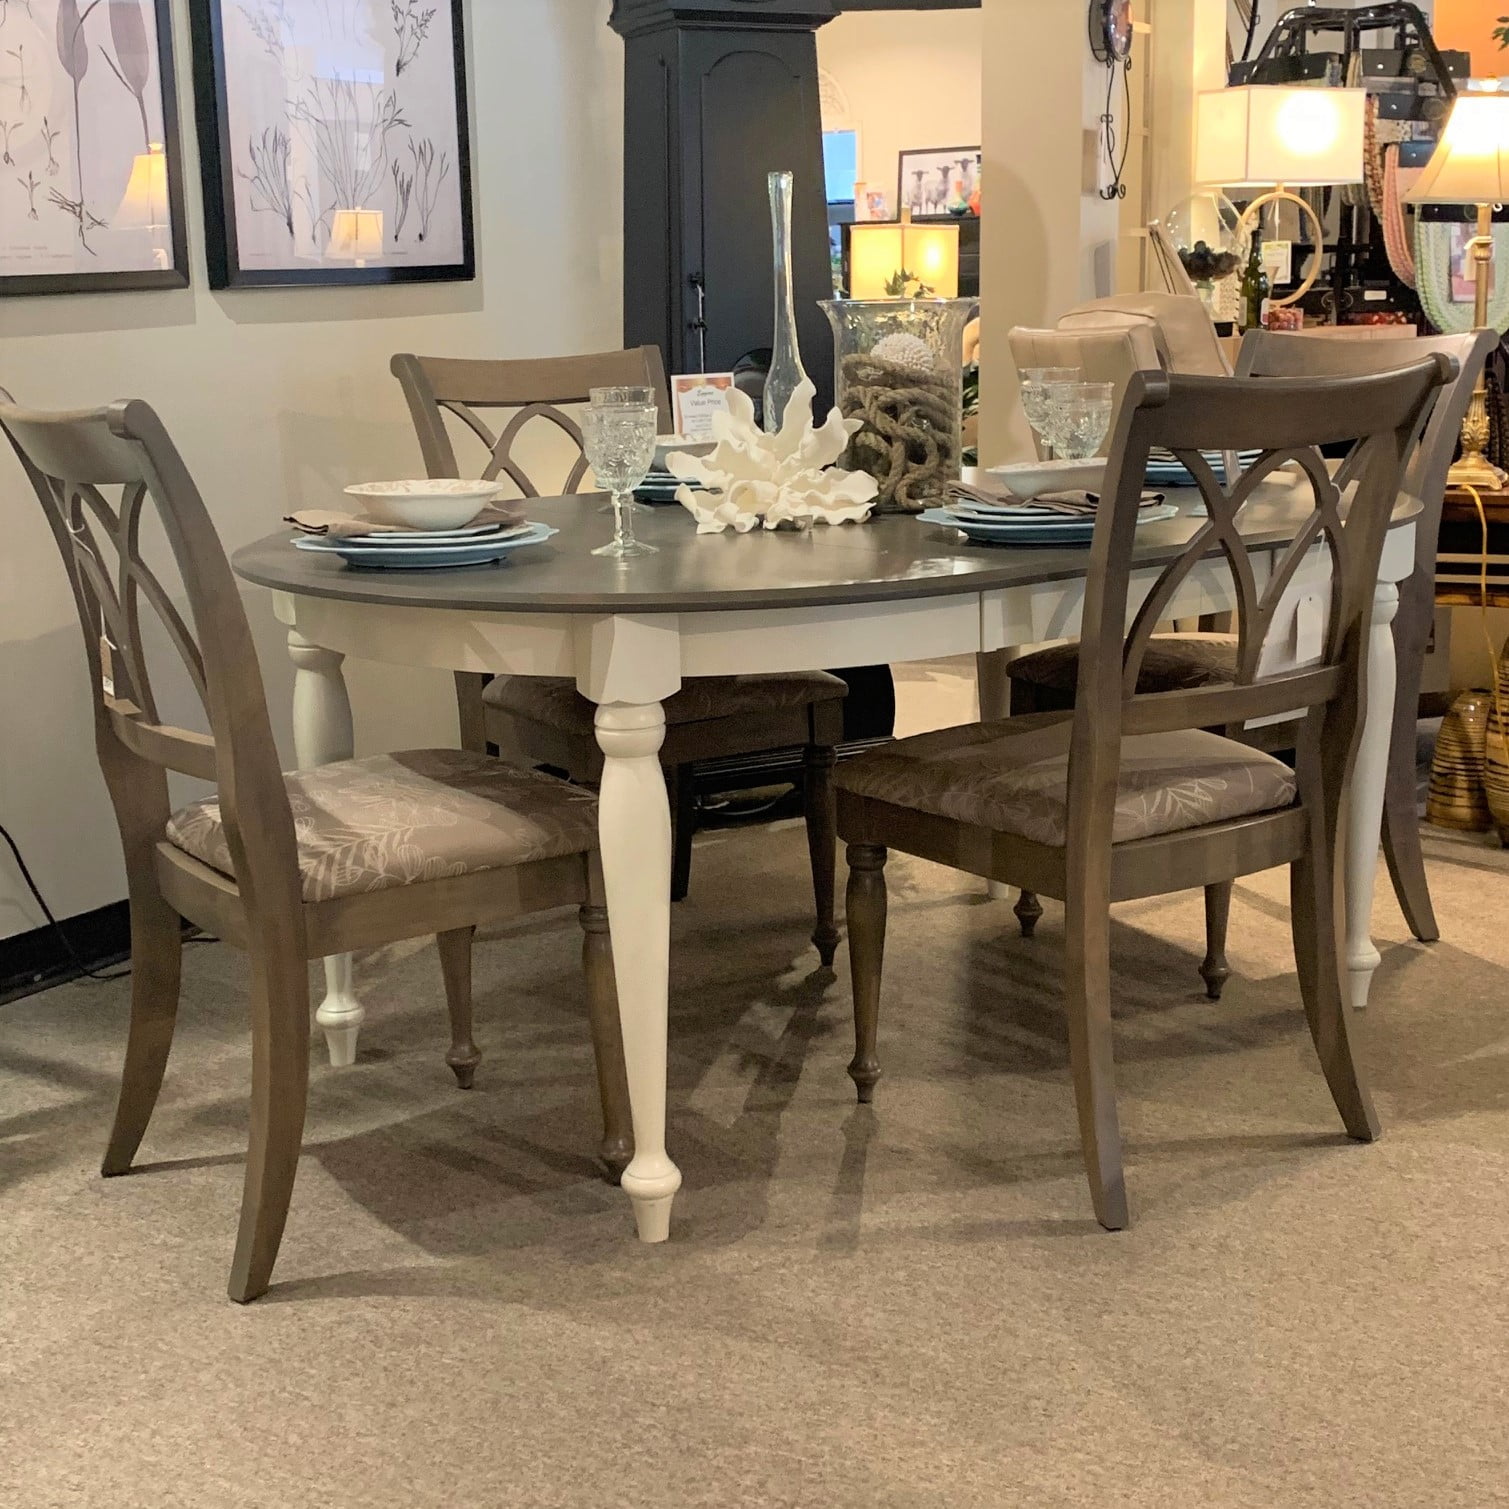 TRN-4848 Round Ext. table  chairs as shown. Quality built by Canadel  Egger's Furniture